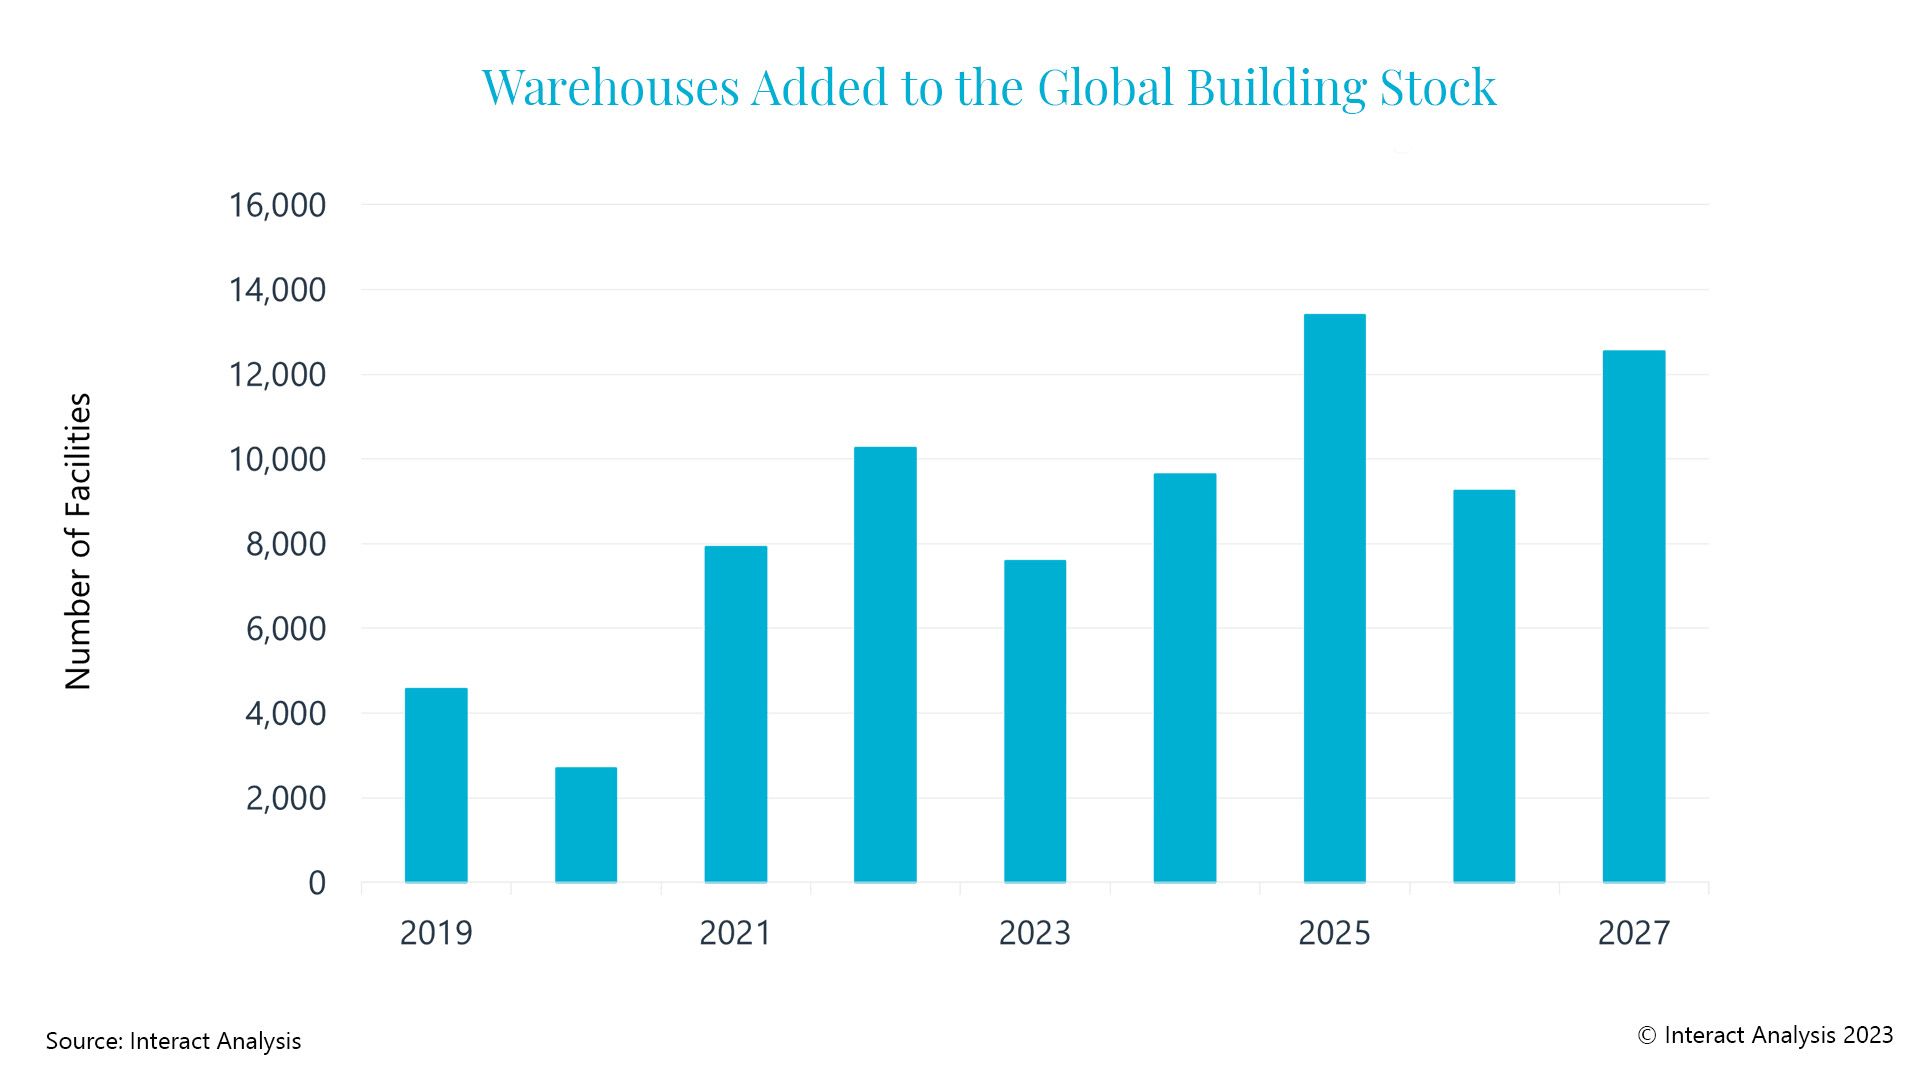 Warehouse construction recovery expected for 2024